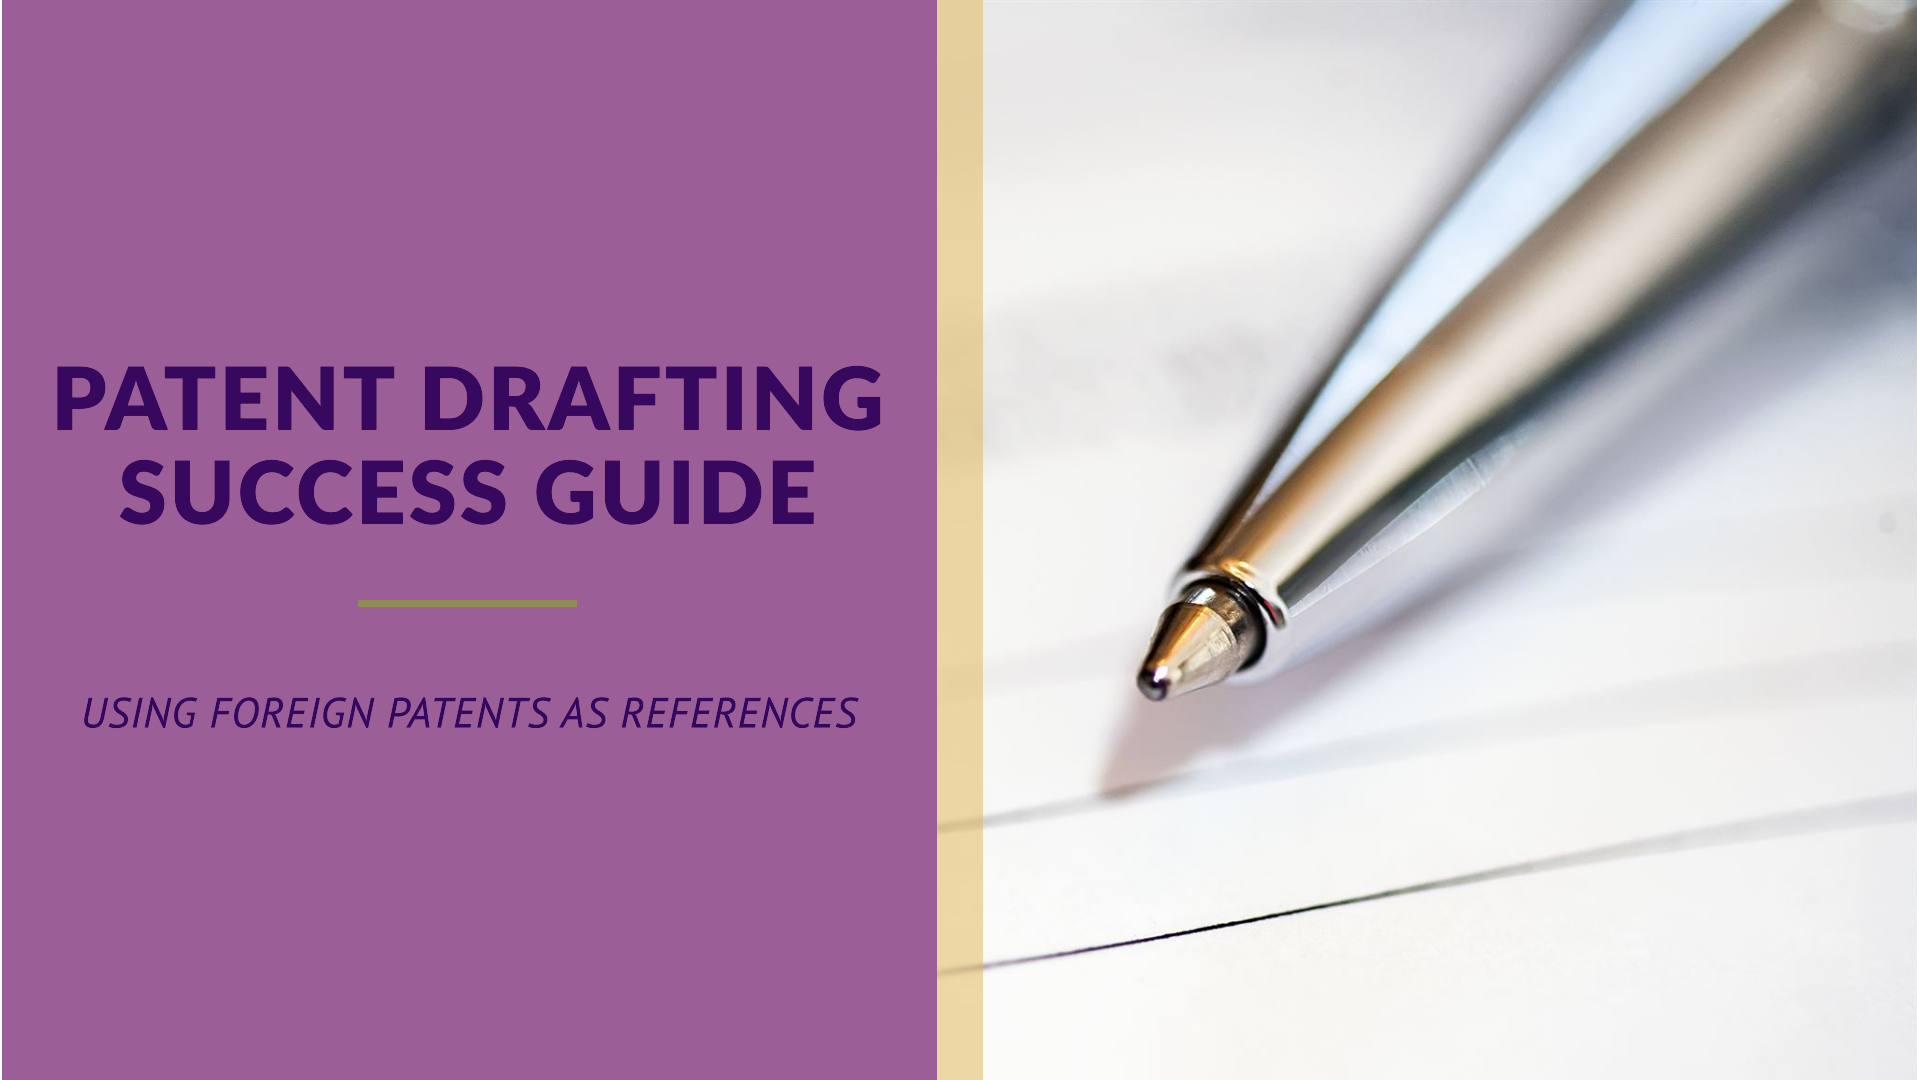 Using Foreign Patents as References in Patent Drafting; A Guide, for Success